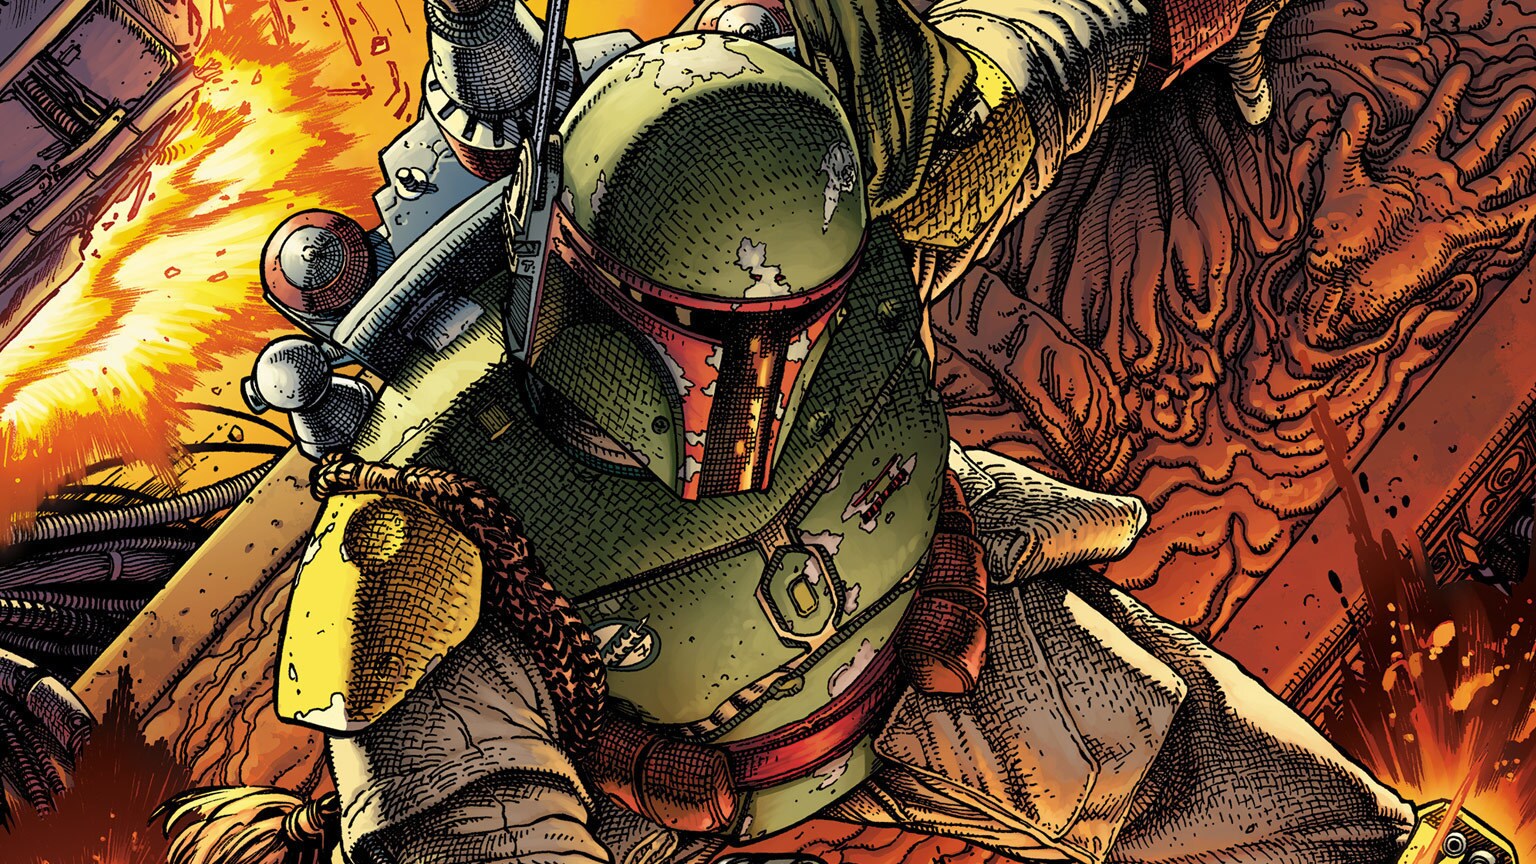 Boba Fett Will Take on the Galaxy’s Worst in Marvel’s Epic War of the Bounty Hunters – Exclusive